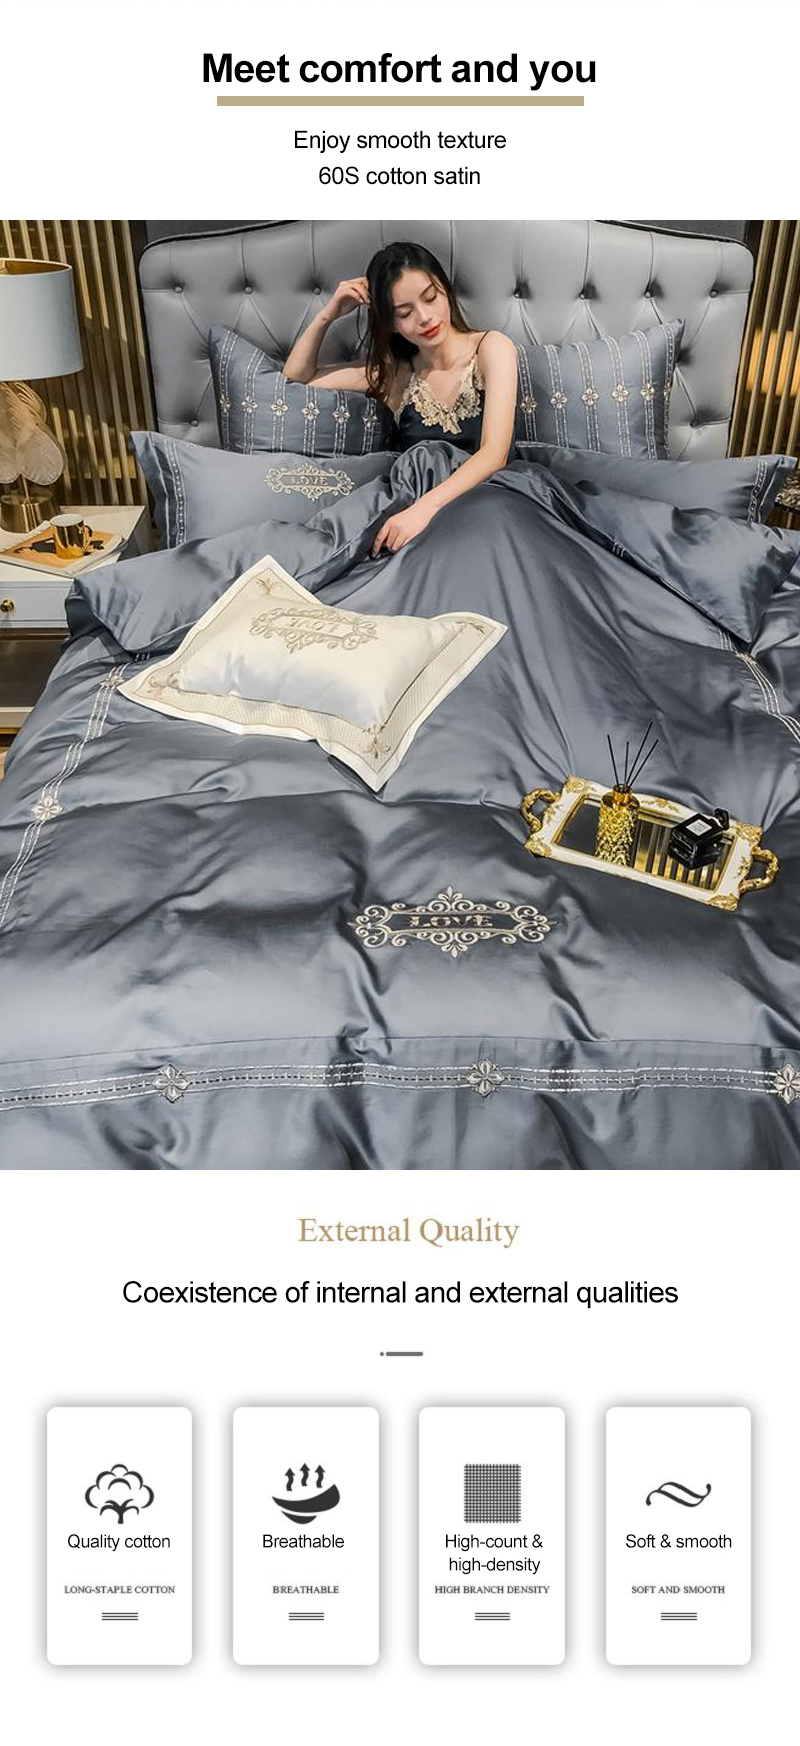 Home Decoration With LOGO Bedding